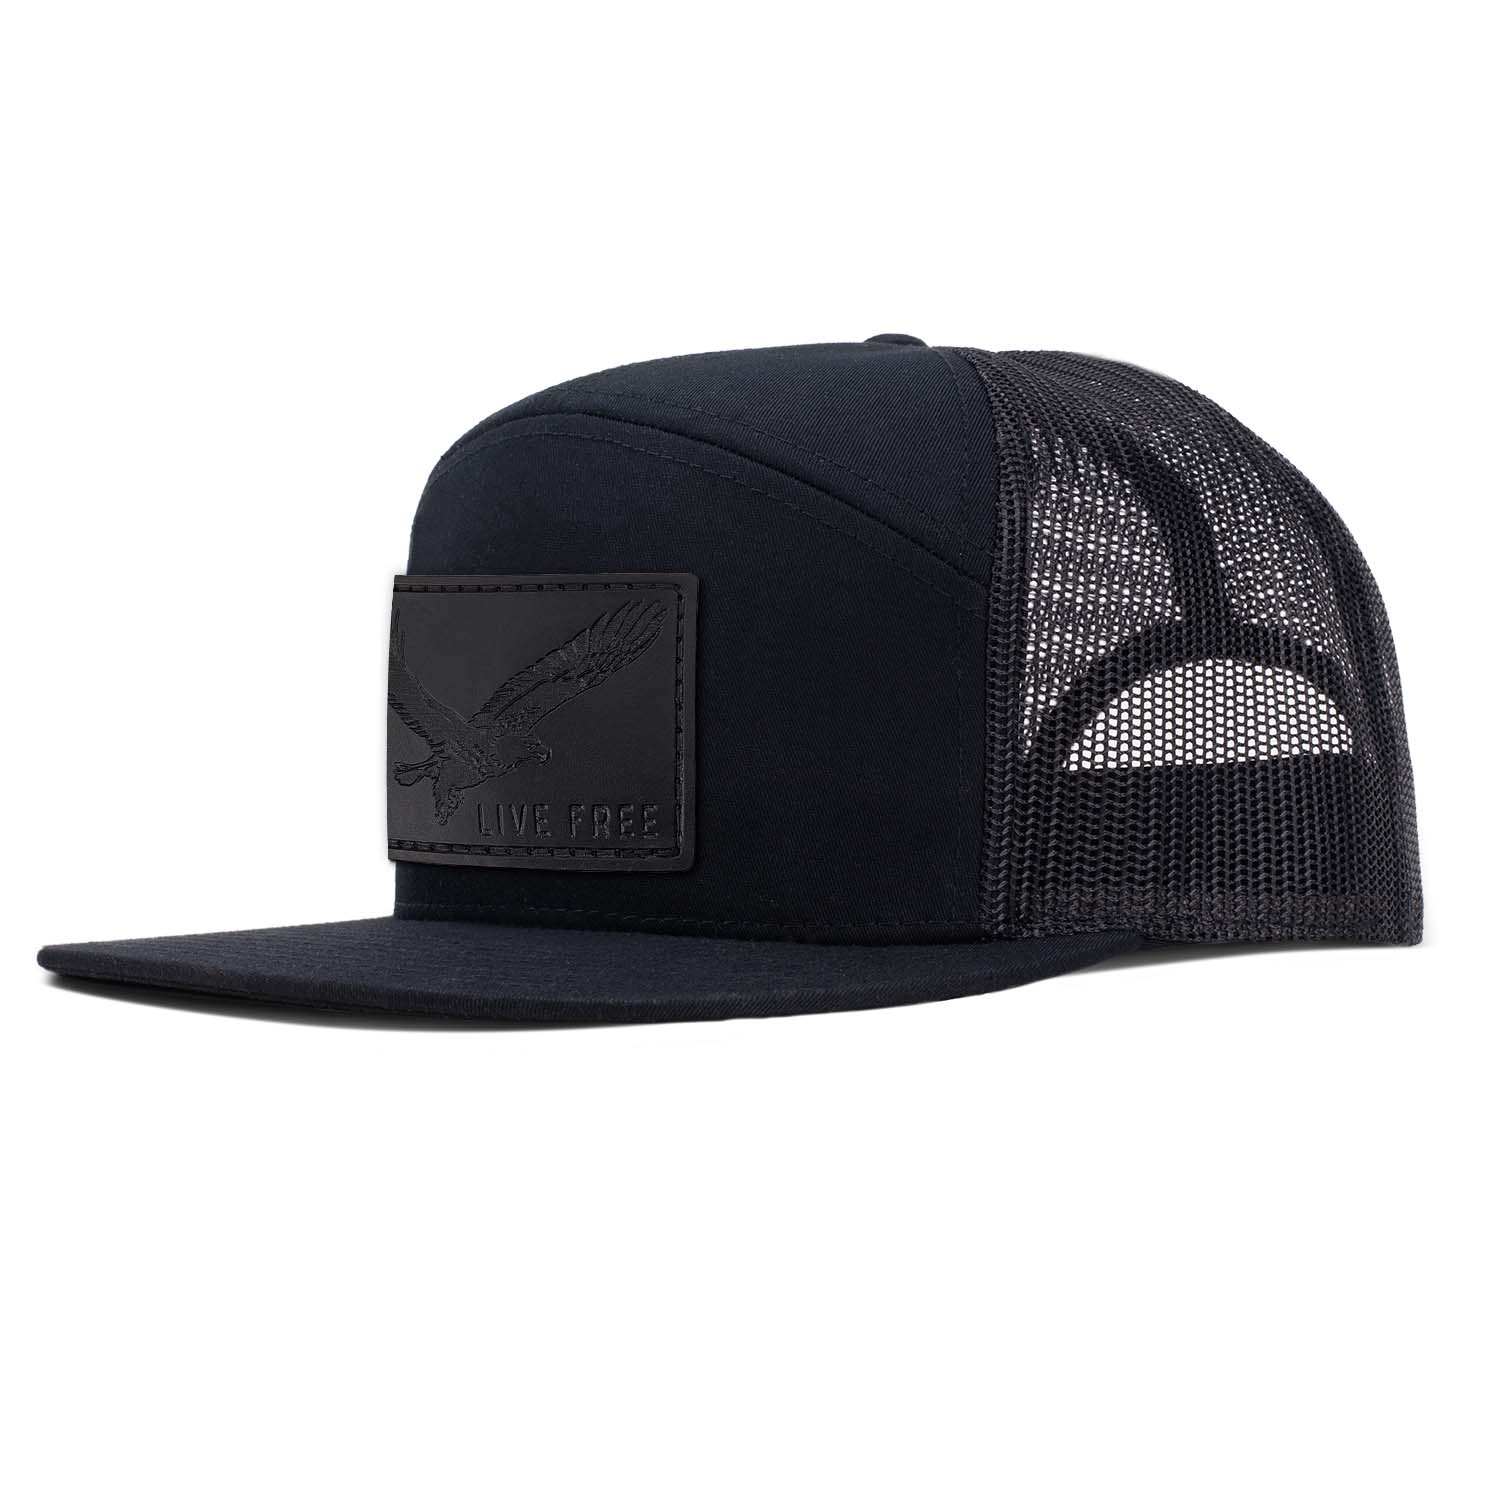 Revolution Mfg black with black mesh 7 panel trucker featuring our full grain leather black Live Free patch on the seamless front panel.